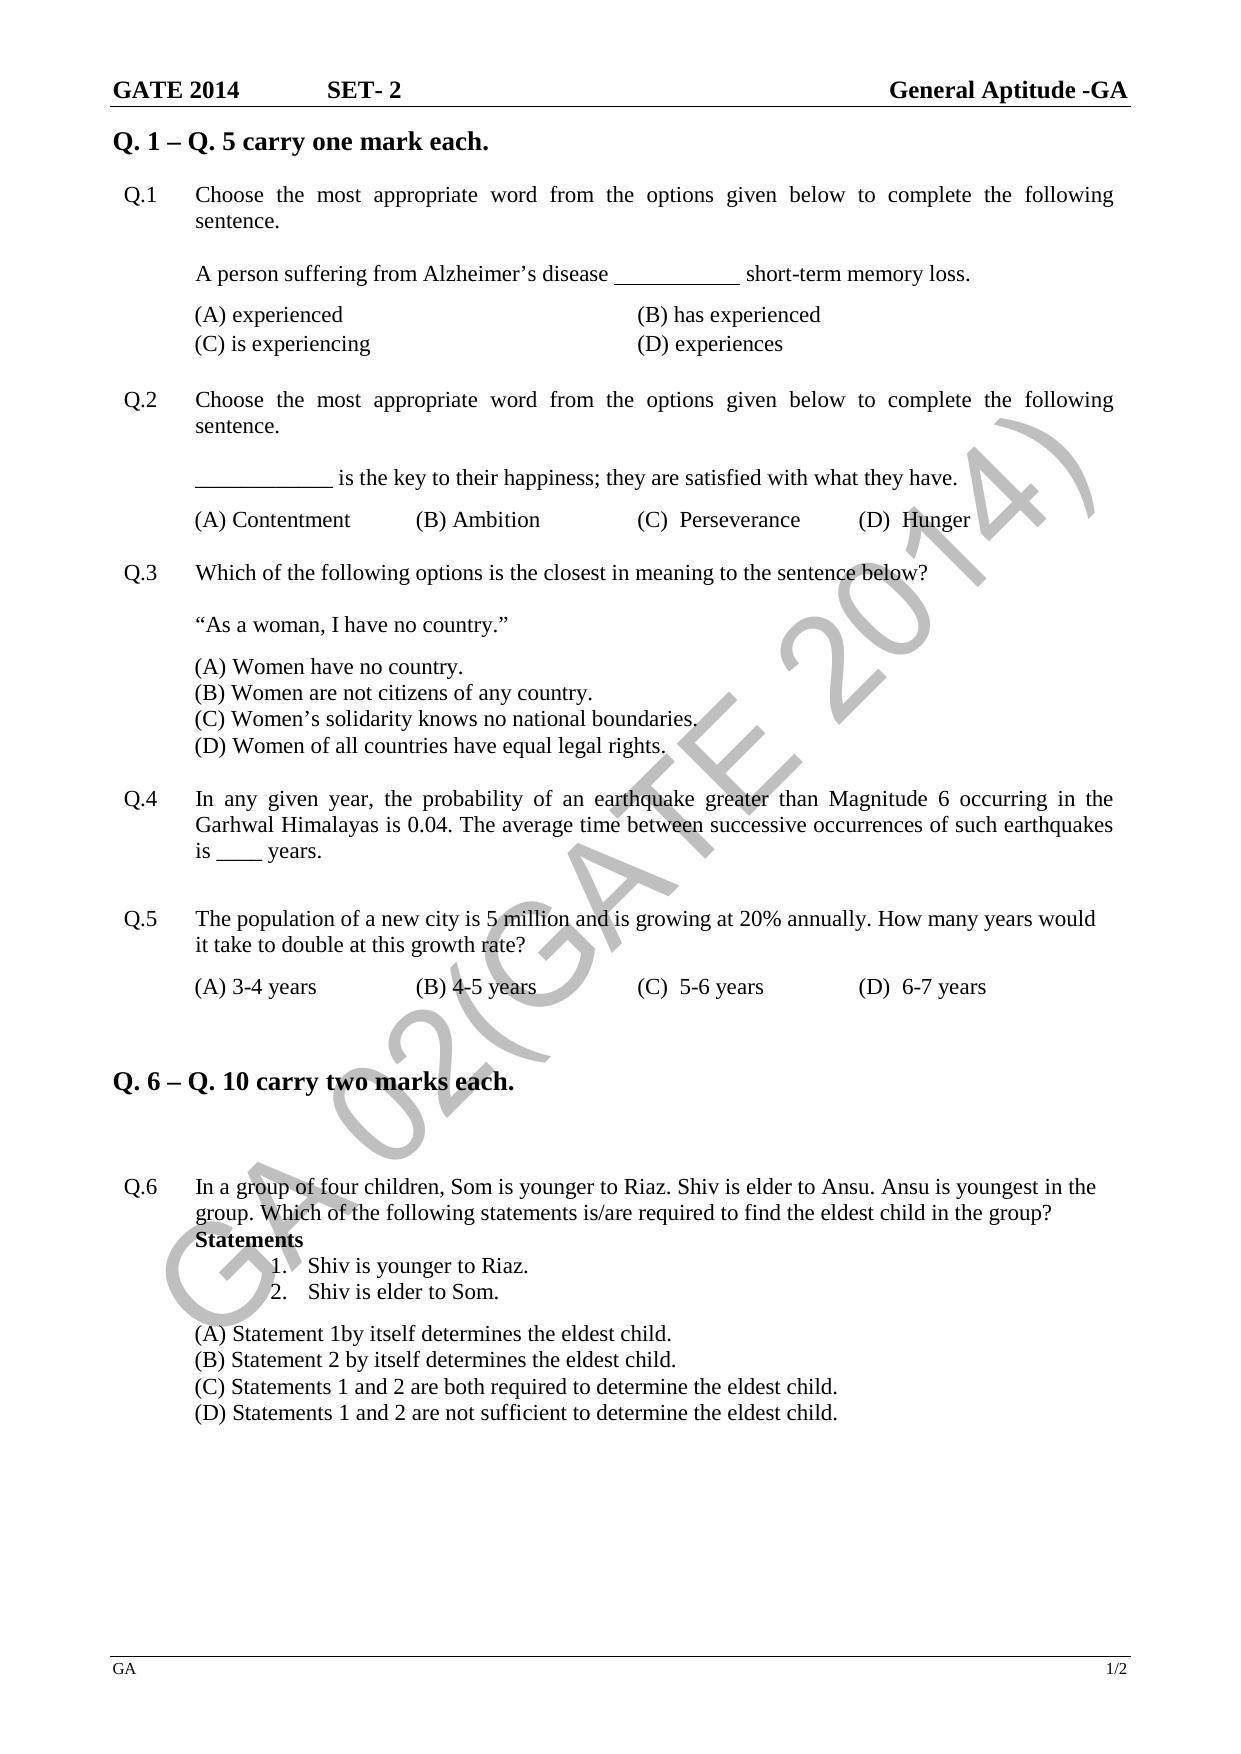 GATE 2014 Civil Engineering (CE) Question Paper with Answer Key - Page 27